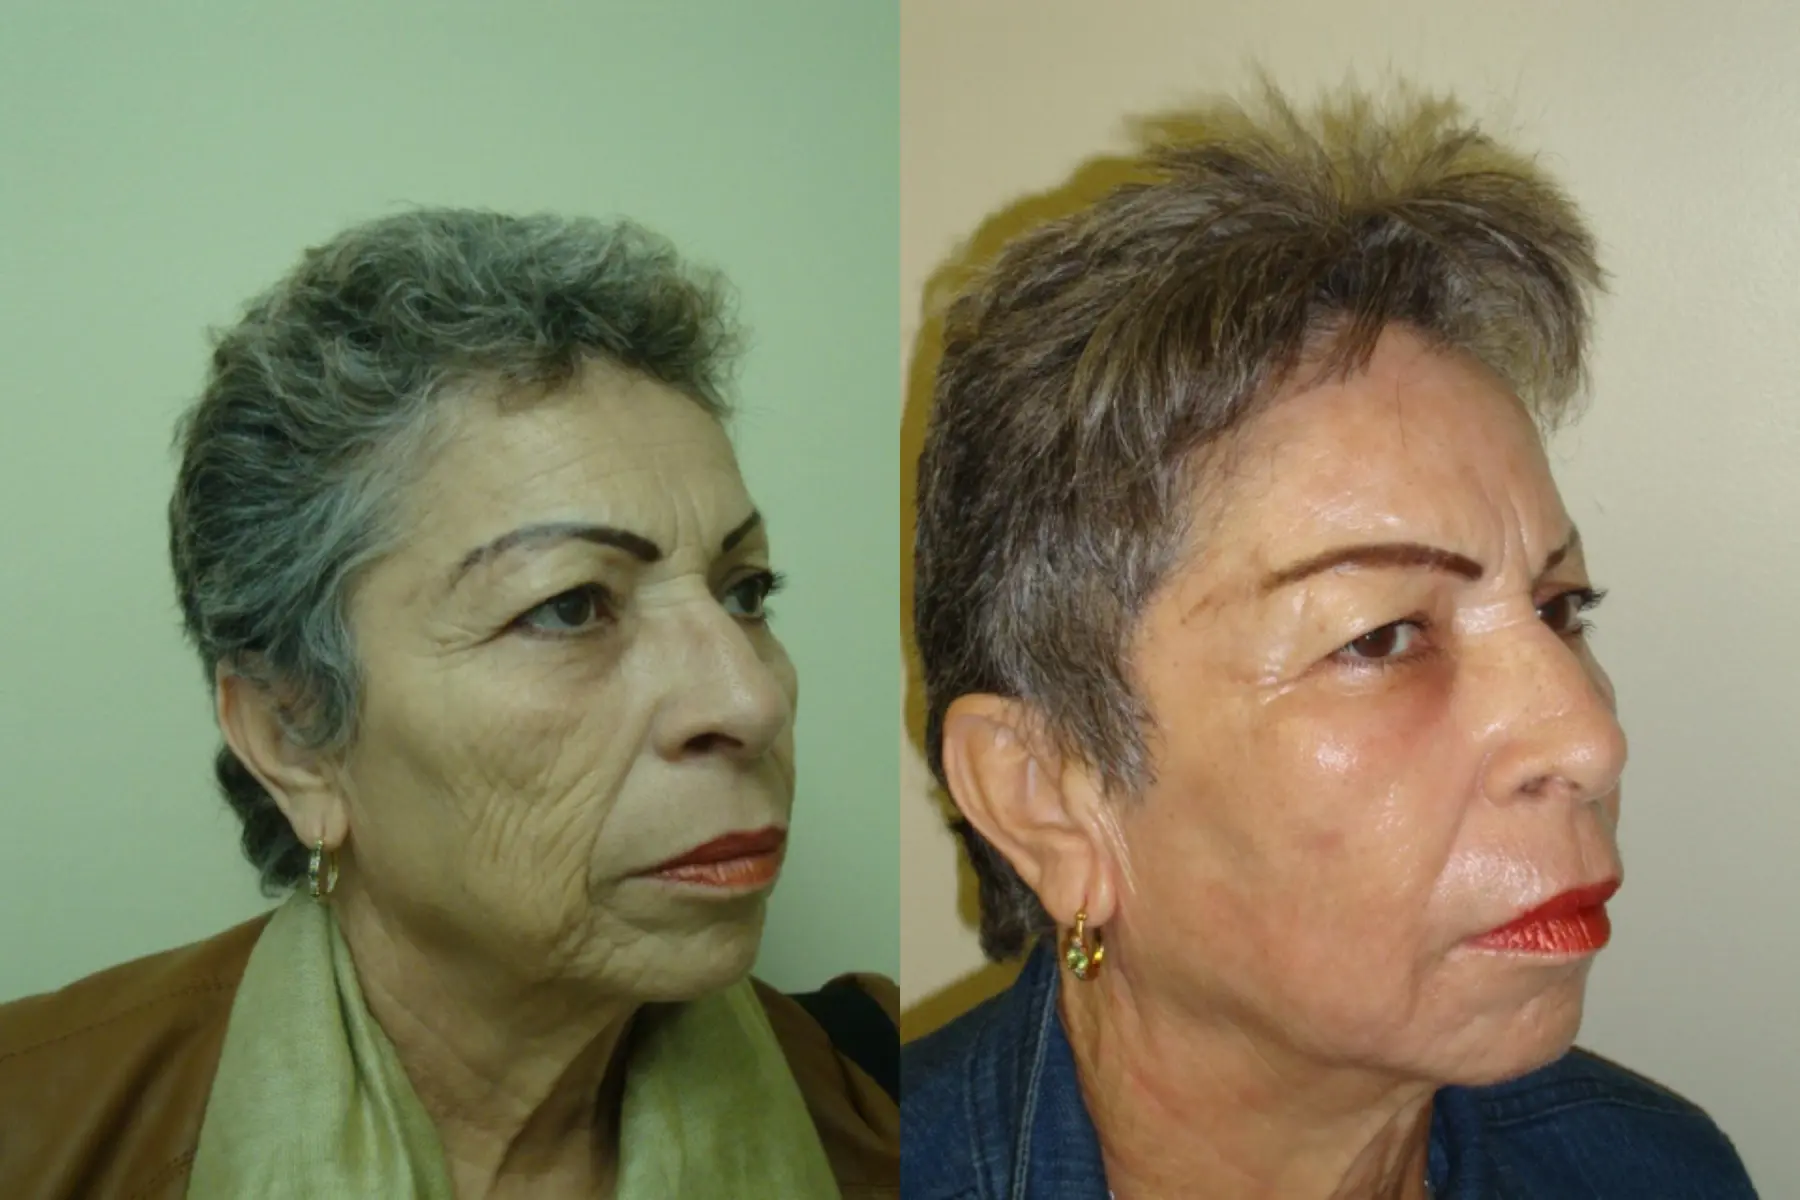 Fat Transfer - Face: Patient 2 - Before and After  